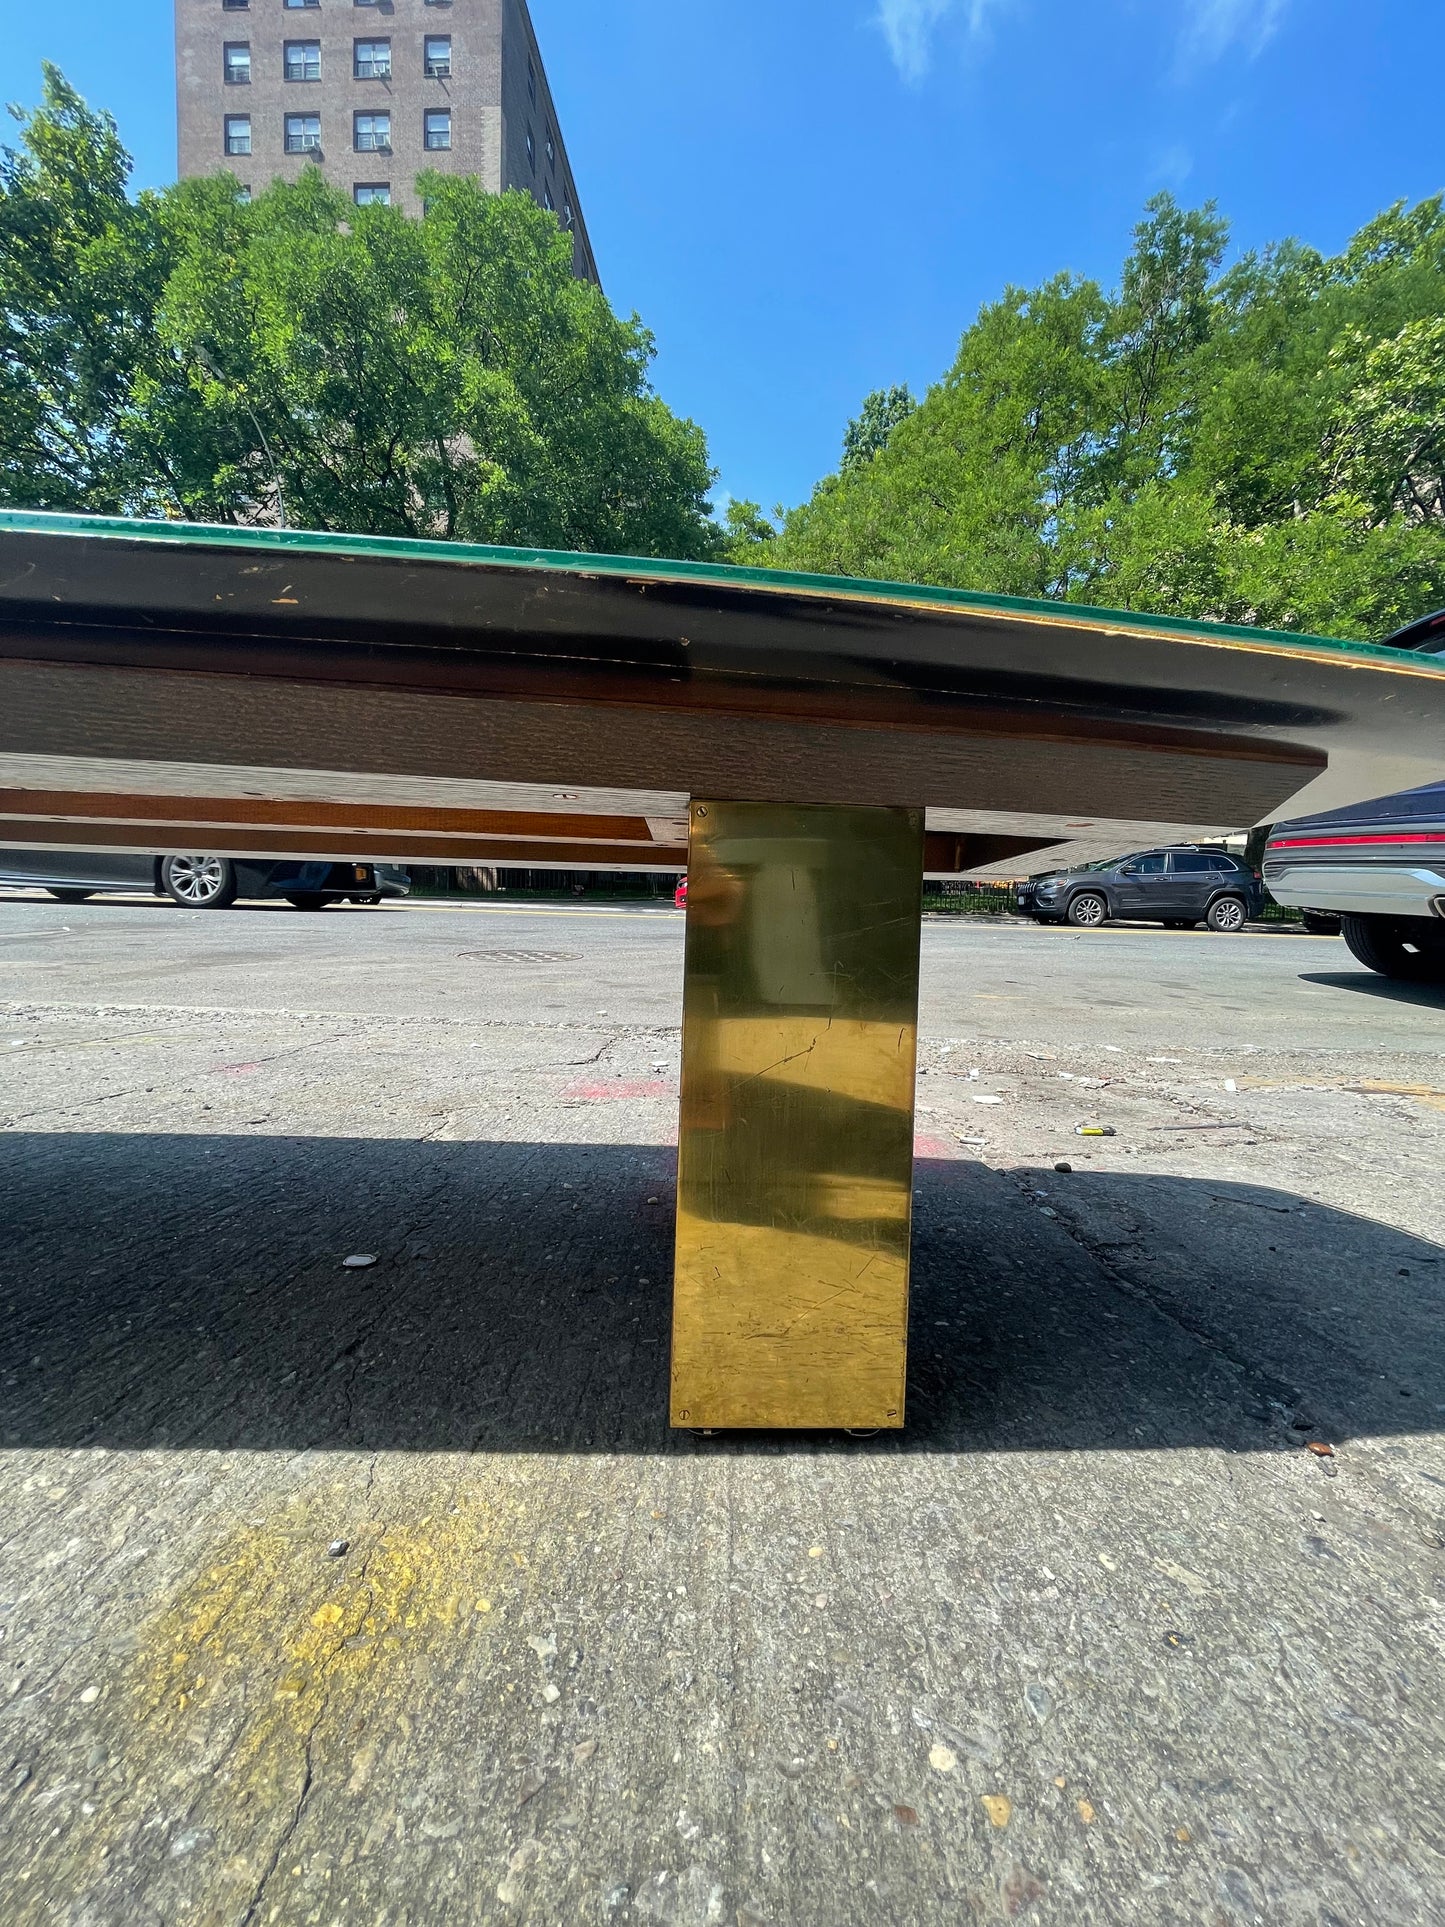 Surfboard Shaped Coffee Table With Marble Inlay and Brass Legs